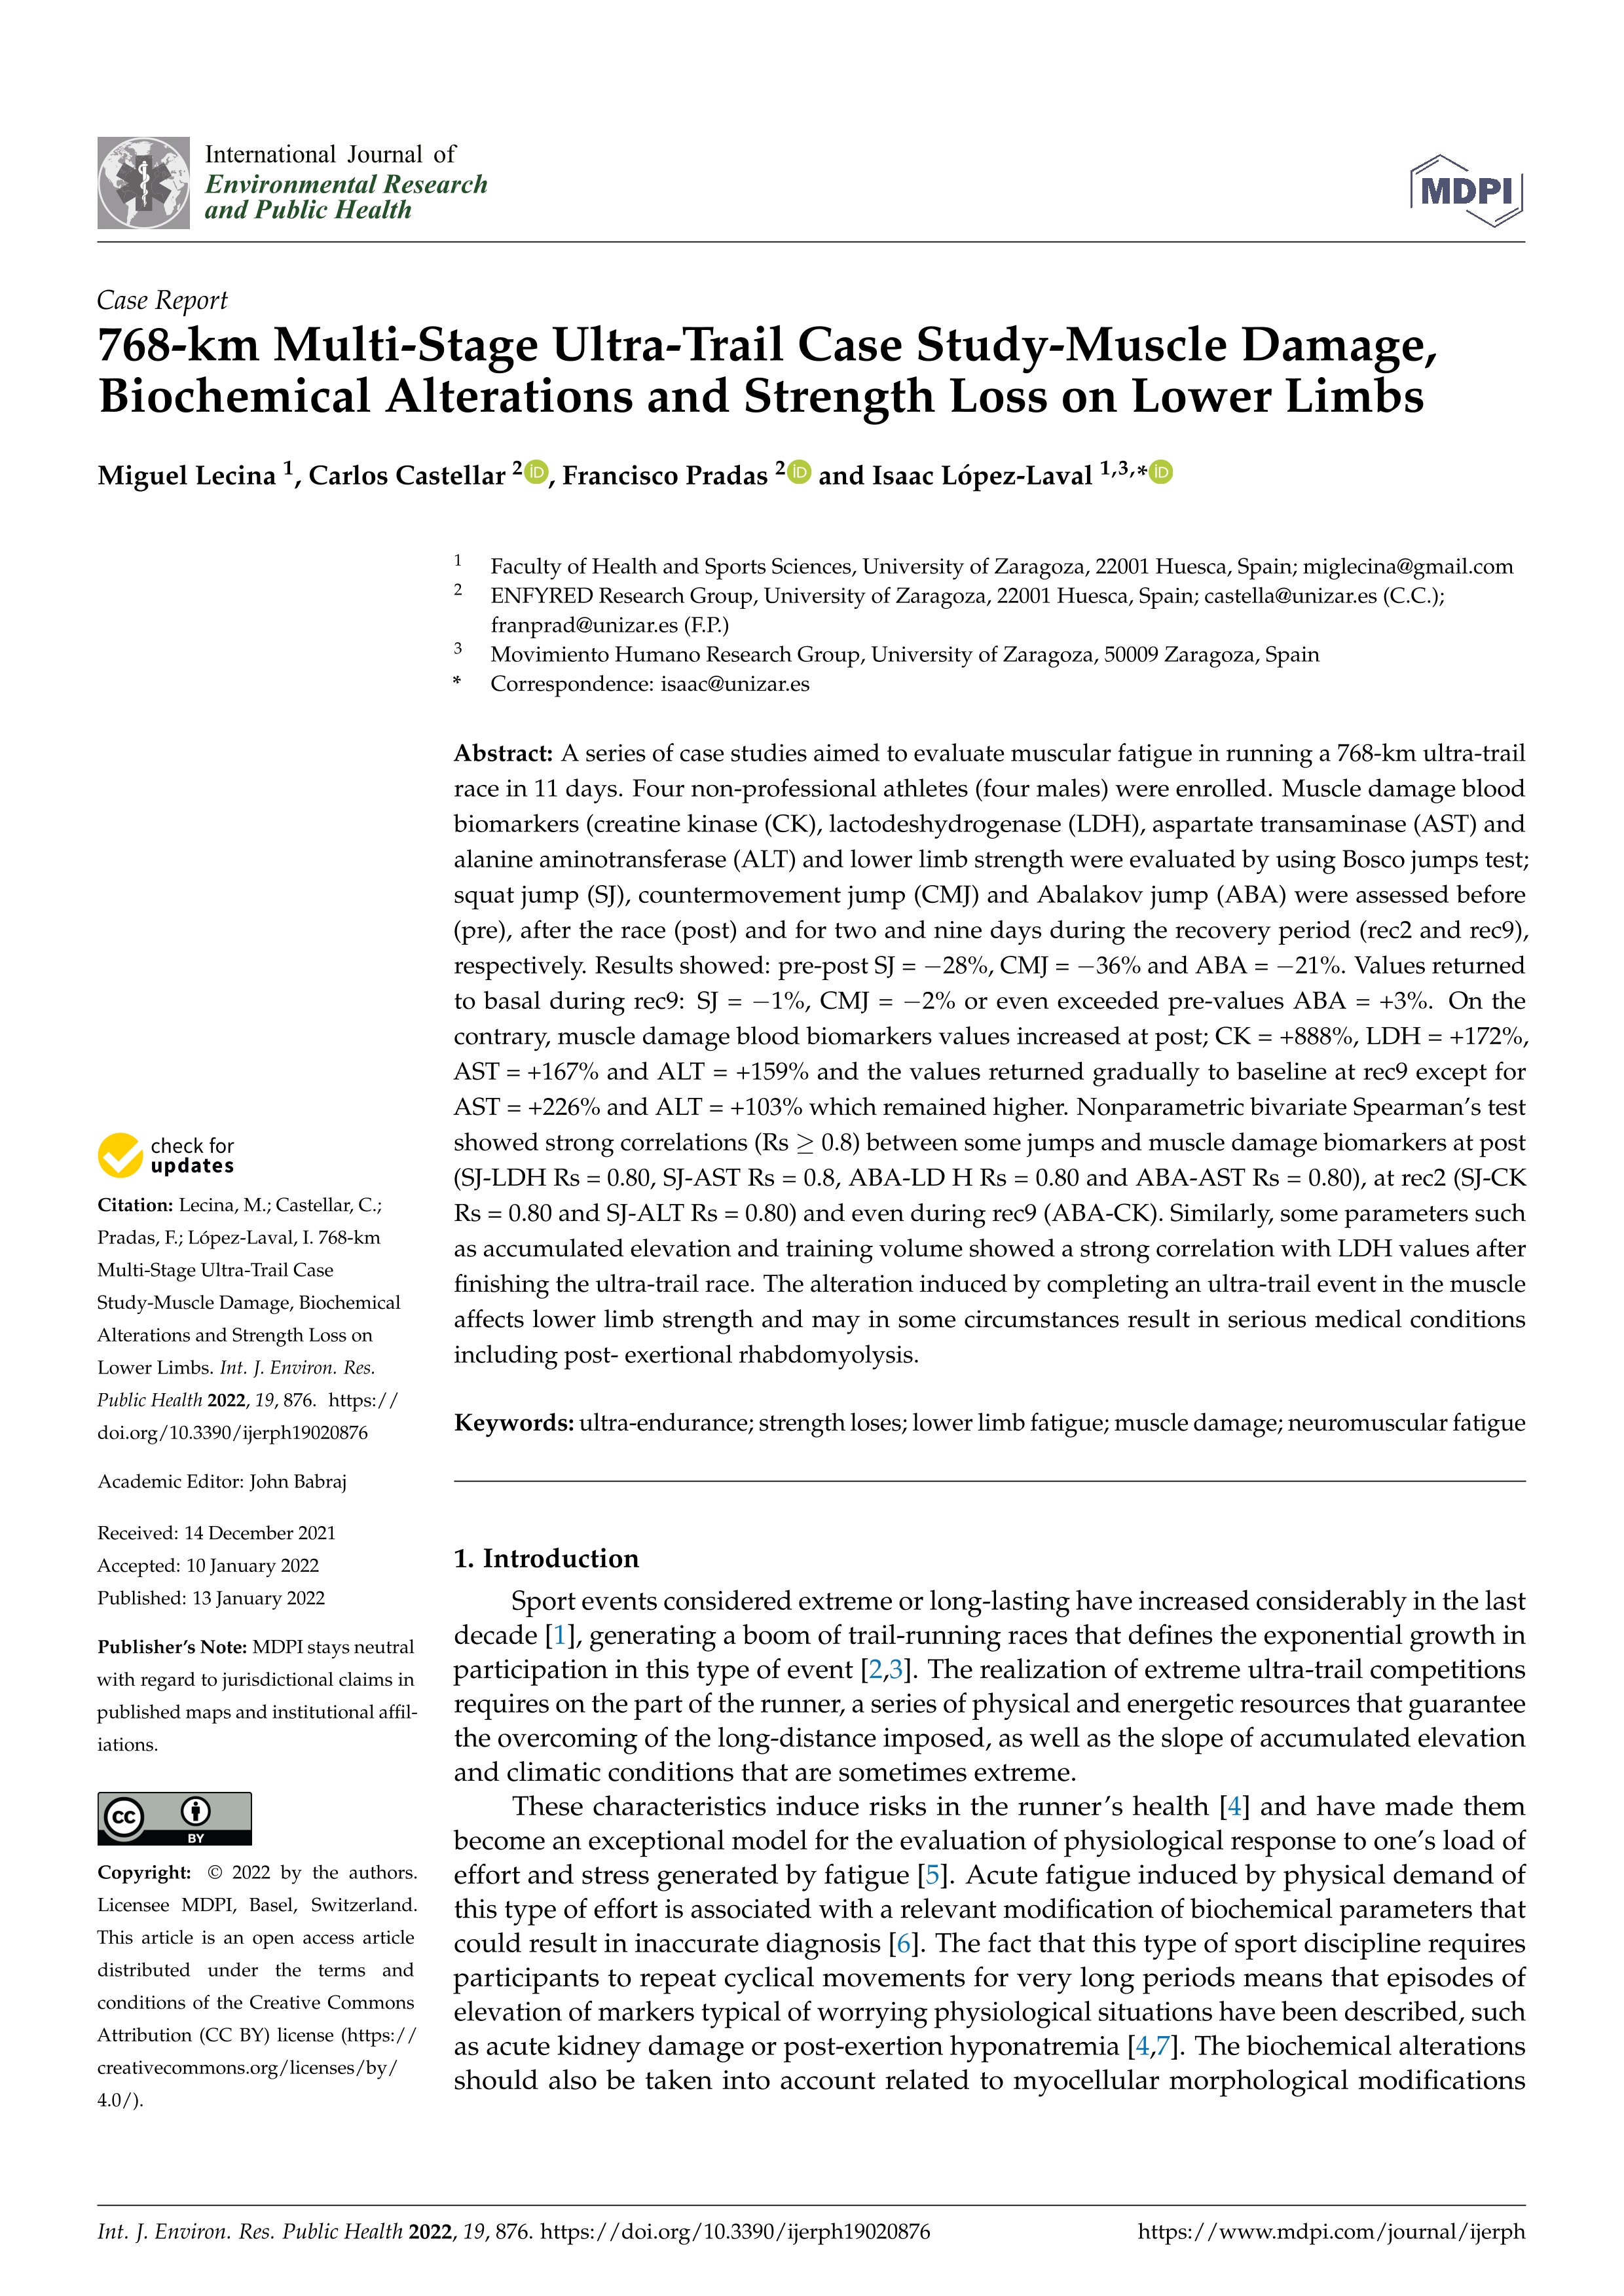 768-km Multi-Stage Ultra-Trail Case Study-Muscle Damage, Biochemical Alterations and Strength Loss on Lower Limbs